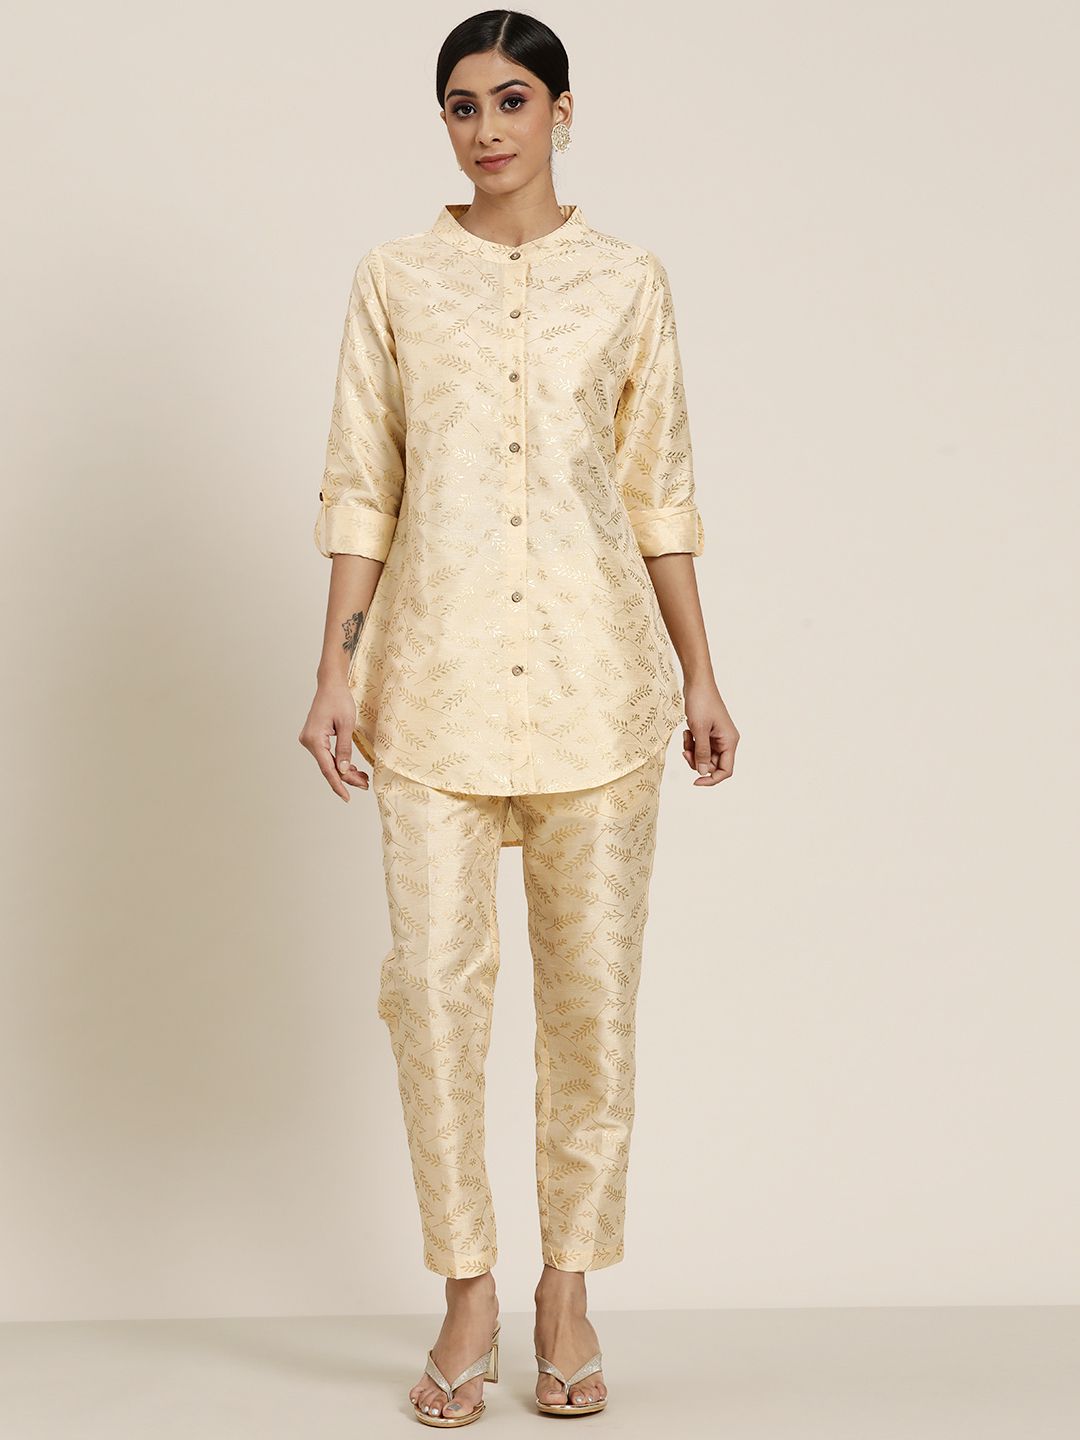 Shae by SASSAFRAS Beige Foil Printed Shirt with Pencil Trousers Price in India